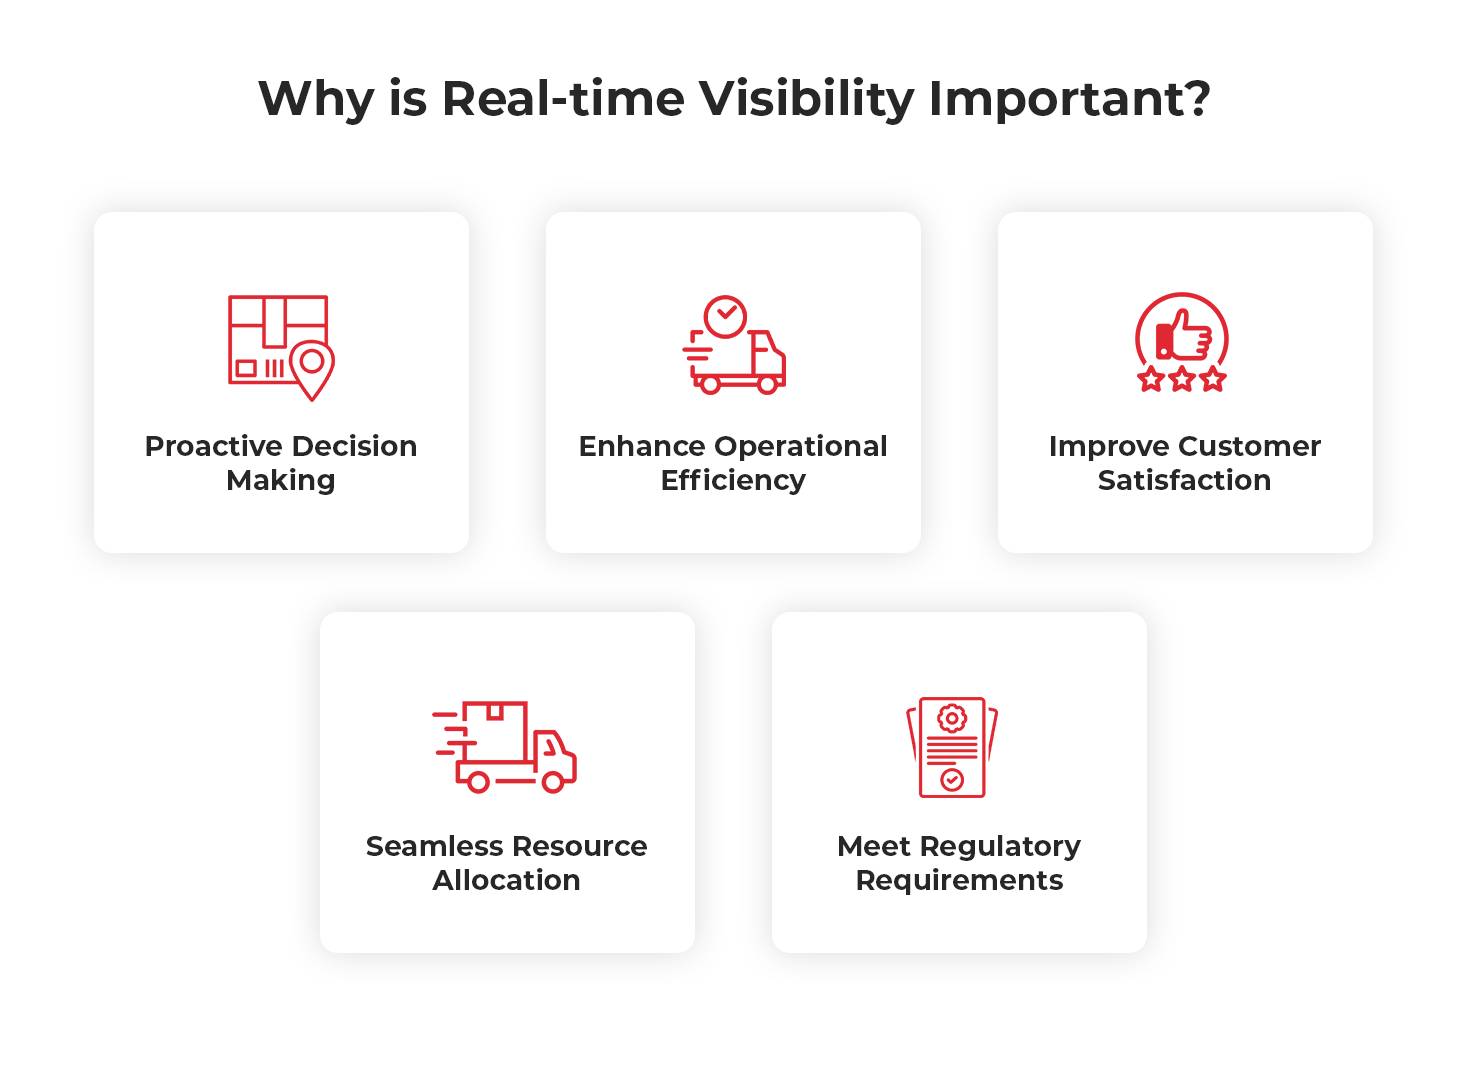 Why is Real-time Visibility Important?